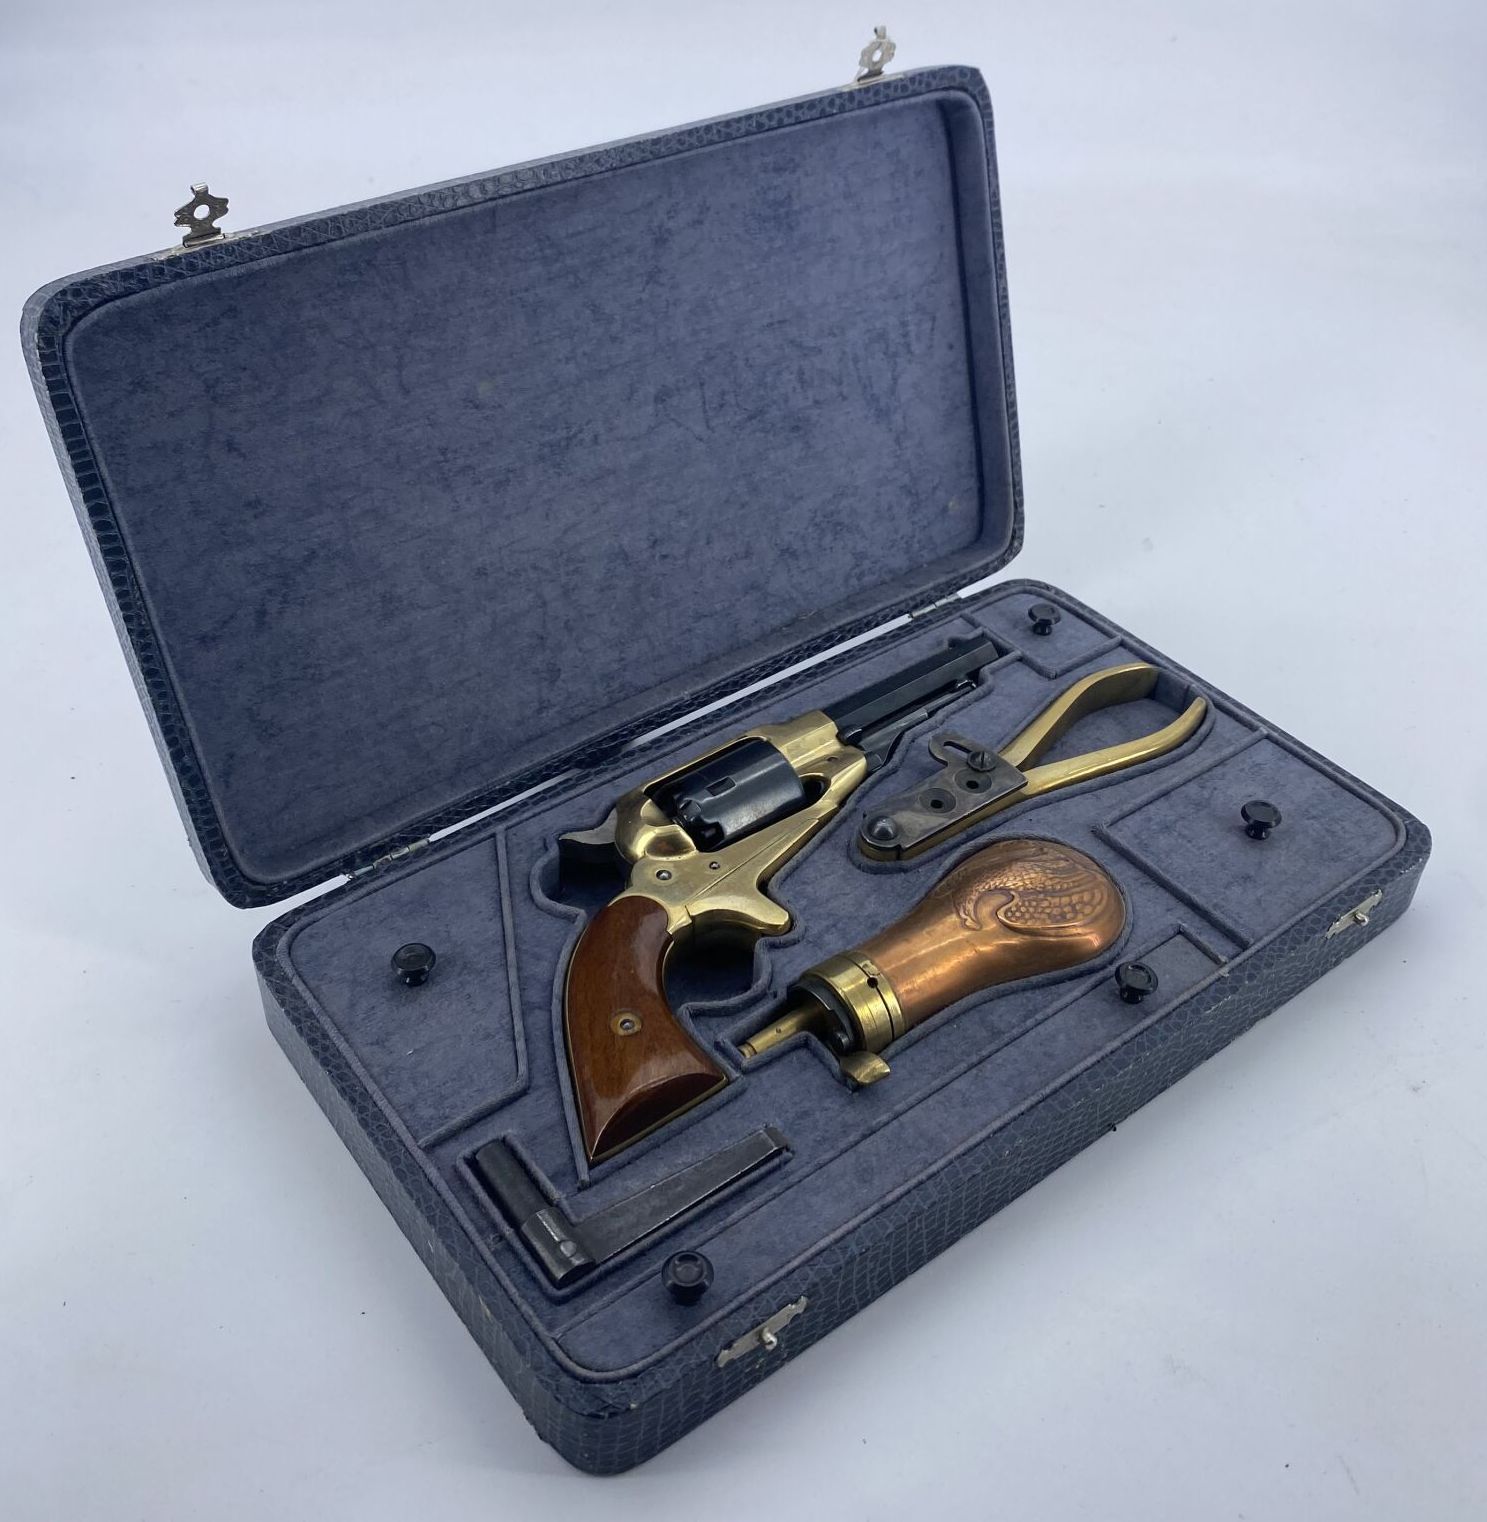 Null Black powder revolver Cal. 32. Bronze frame. Presented in a case with bulle&hellip;